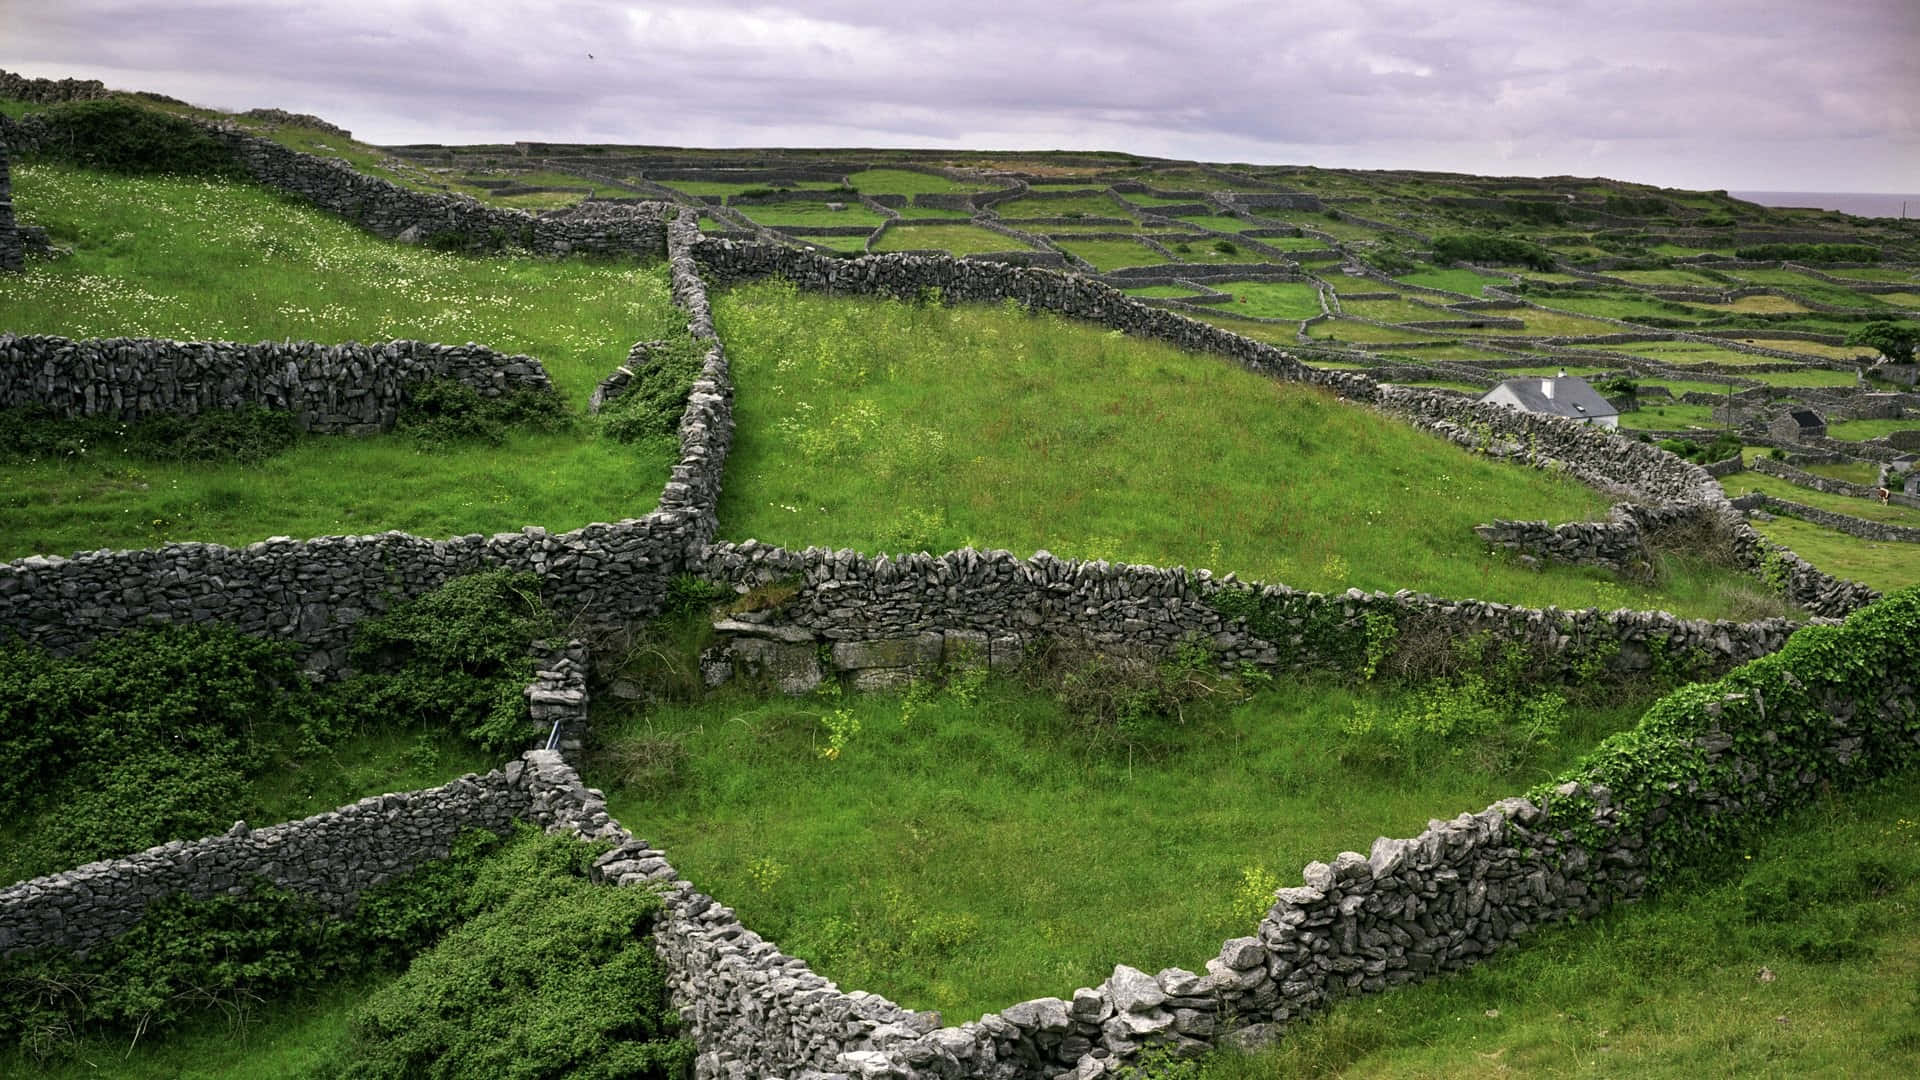 Take in the breathtaking beauty of the Emerald Isle